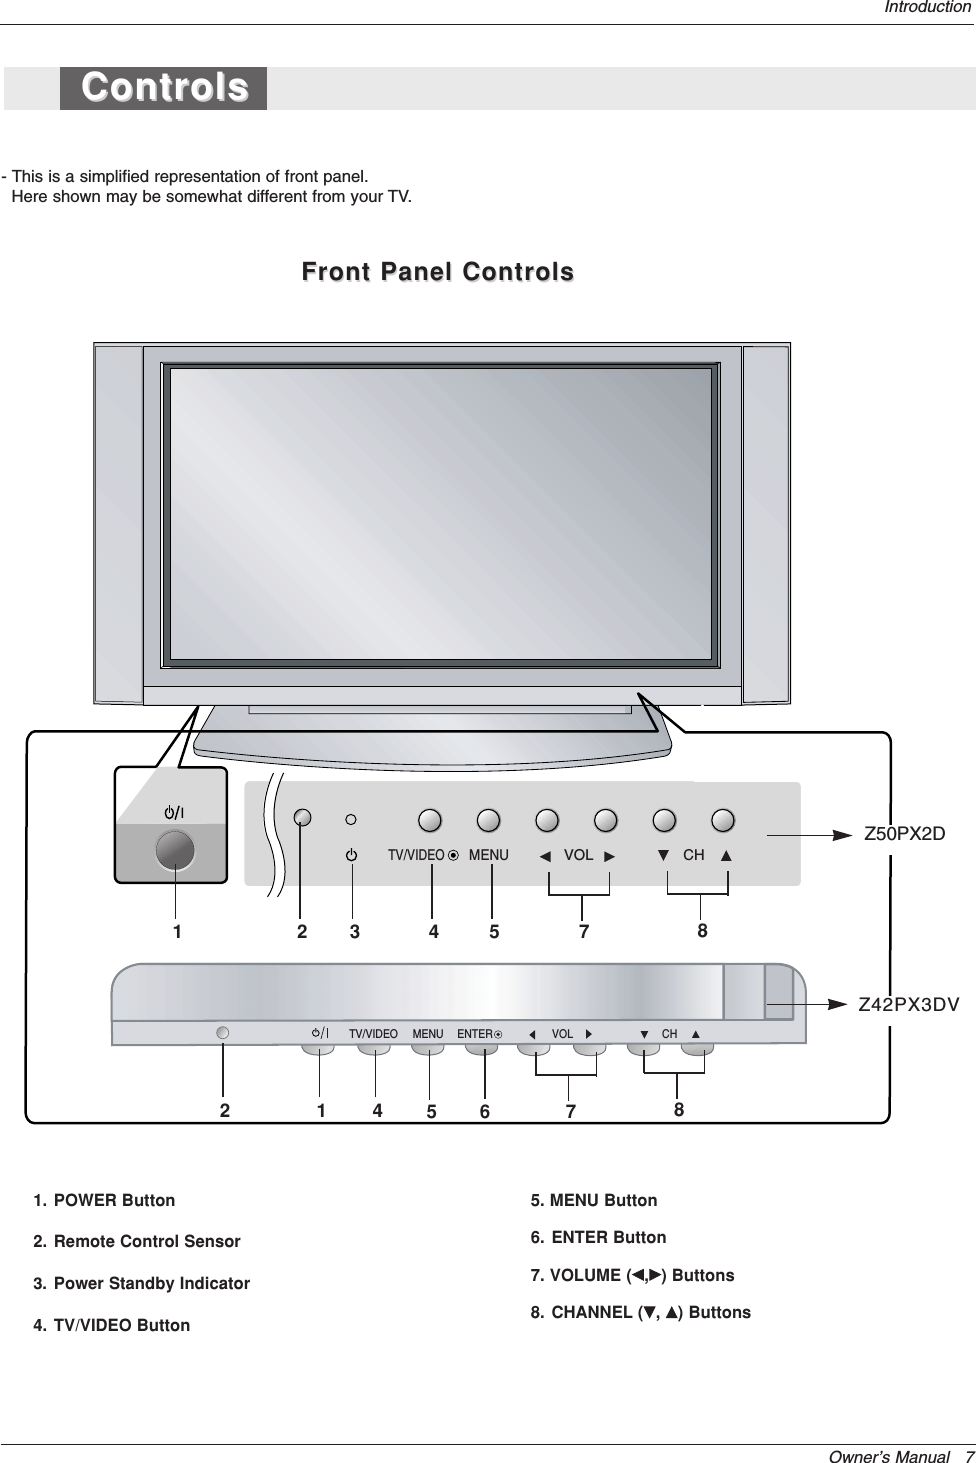 Owner’s Manual   7Introduction- This is a simplified representation of front panel. Here shown may be somewhat different from your TV.ControlsControlsFront Panel ControlsFront Panel ControlsTV/VIDEOMENUVOL CHCHVOLMENUTV/VIDEO ENTERZ50PX2DZ42PX3DV5784311456781. POWER Button2. Remote Control Sensor3.Power Standby Indicator4. TV/VIDEO Button5. MENU Button6. ENTER Button7. VOLUME (F,G) Buttons8. CHANNEL (E, D) Buttons22